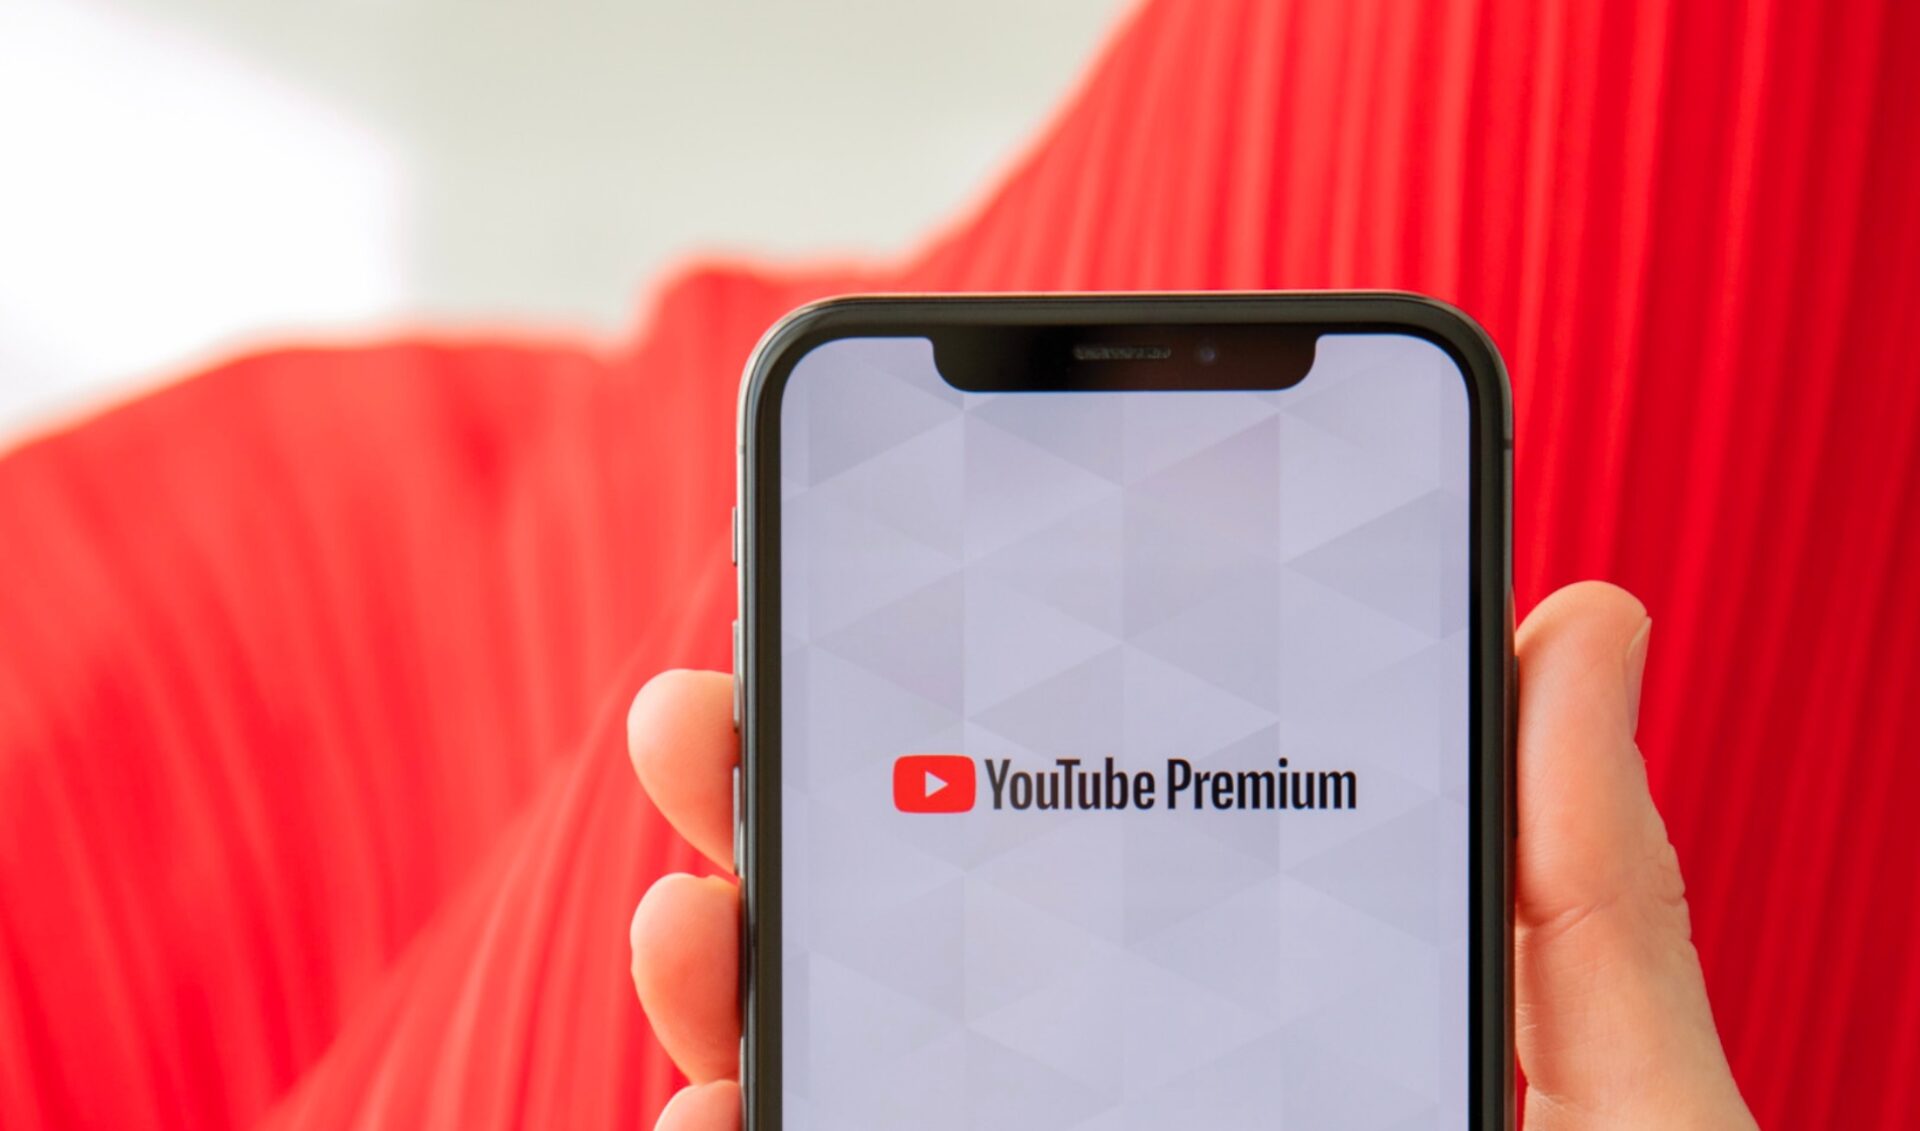 YouTube announces $5 price hike for its Premium family plan